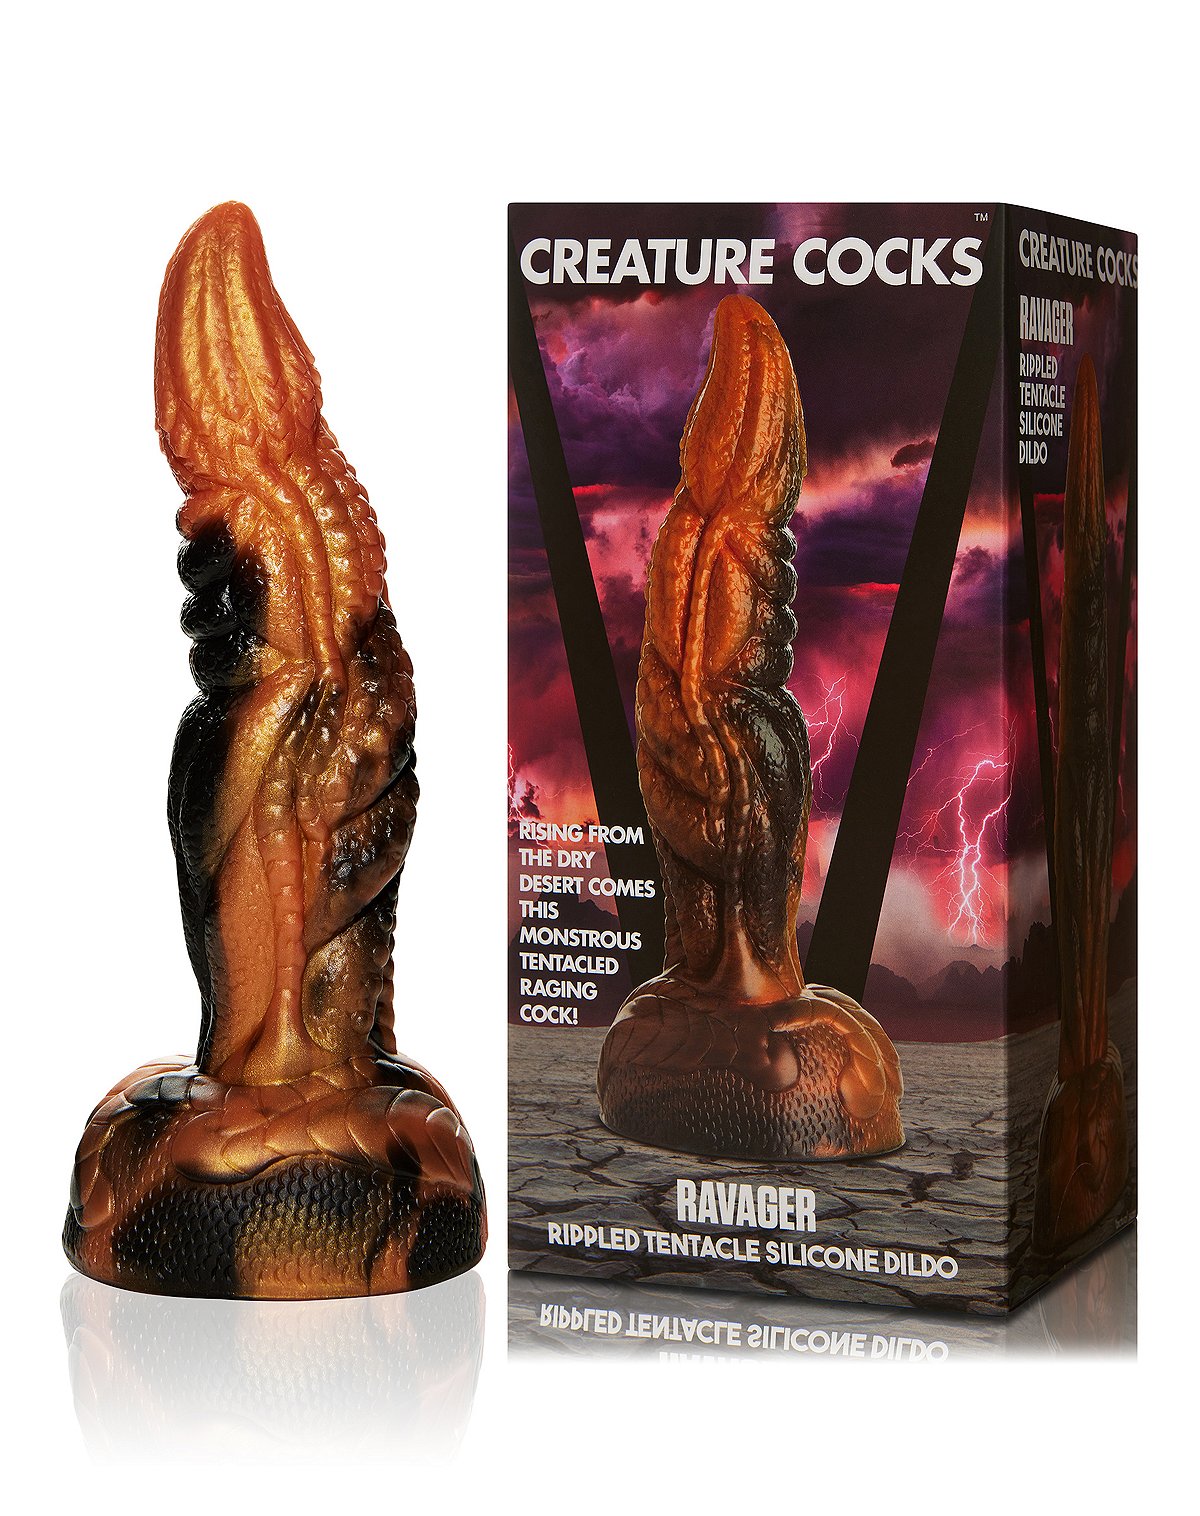 Ravager Ripped Tentacle Dildo 8 Inch - Creature Cocks